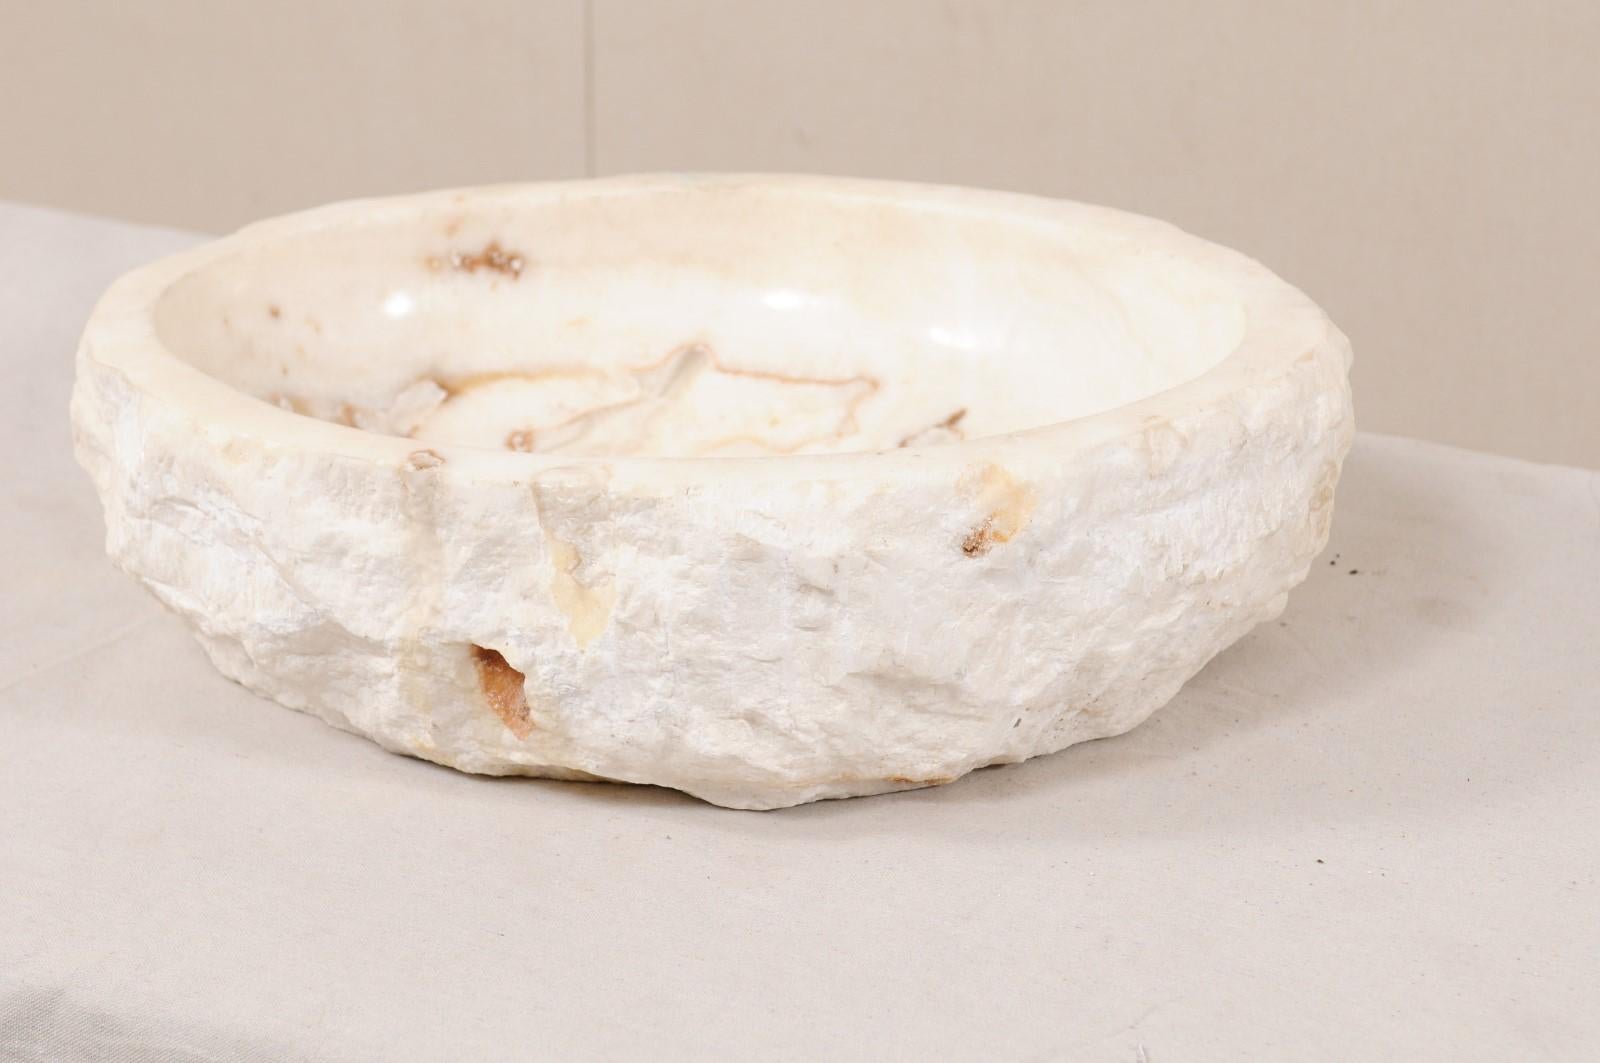 Carved and Polished Creamy White Onyx Stone Sink Basin 6